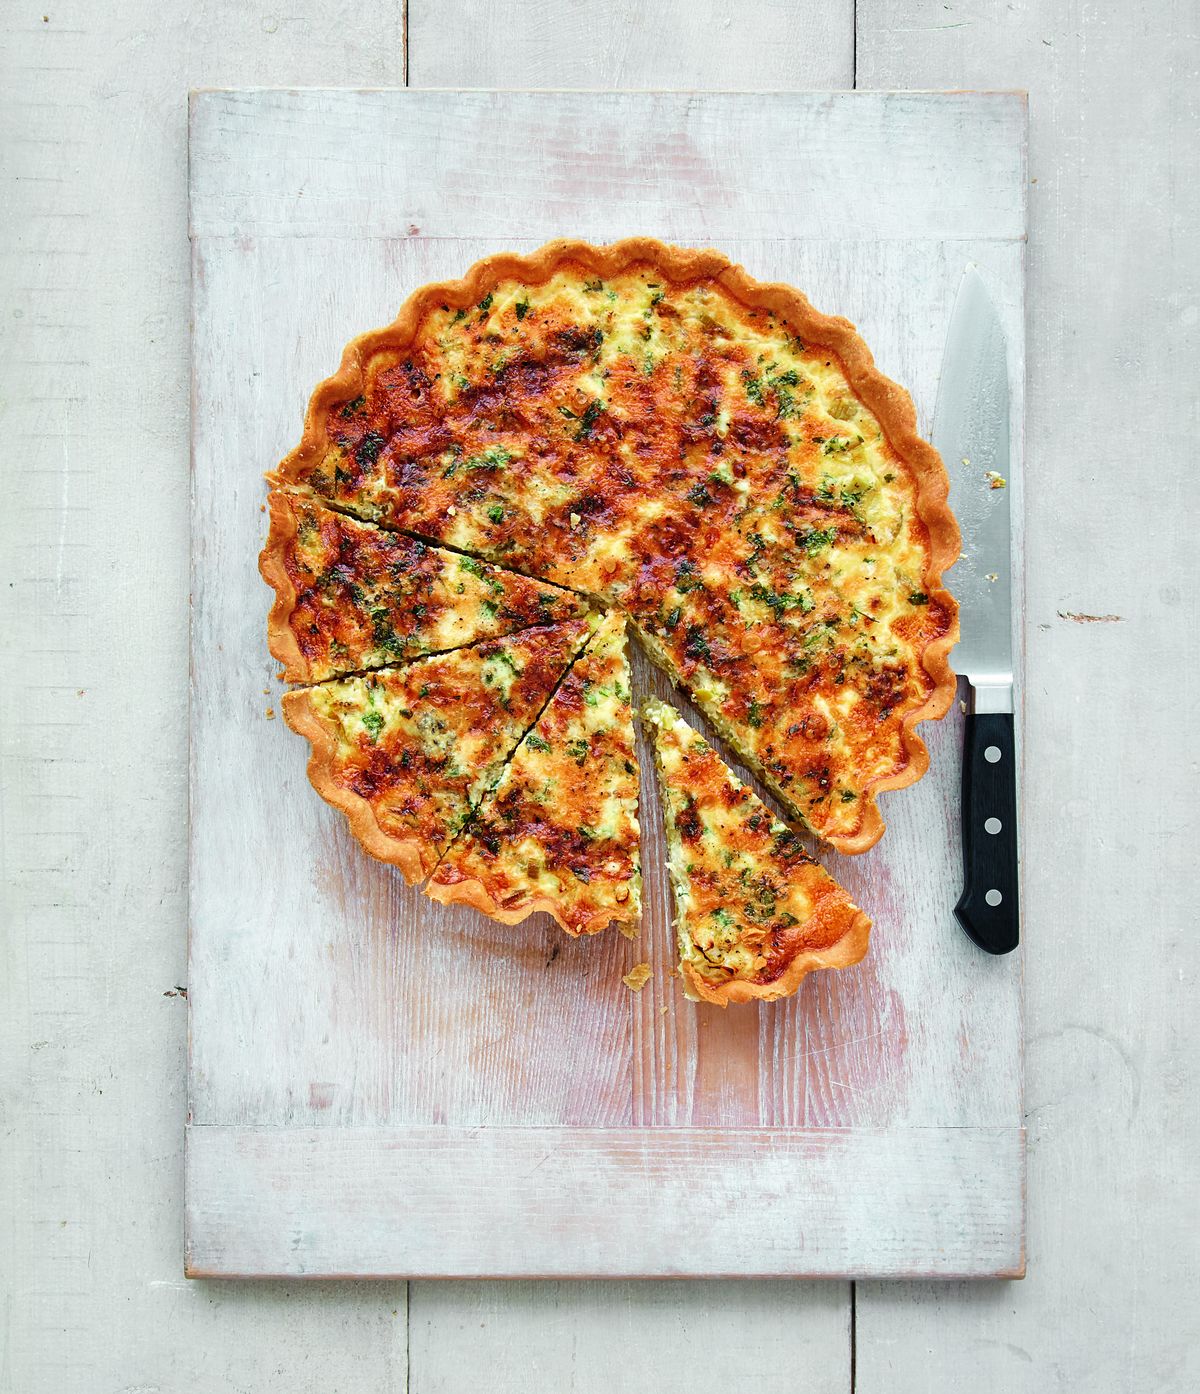 Mary Berry’s Leek and Stilton Quiche